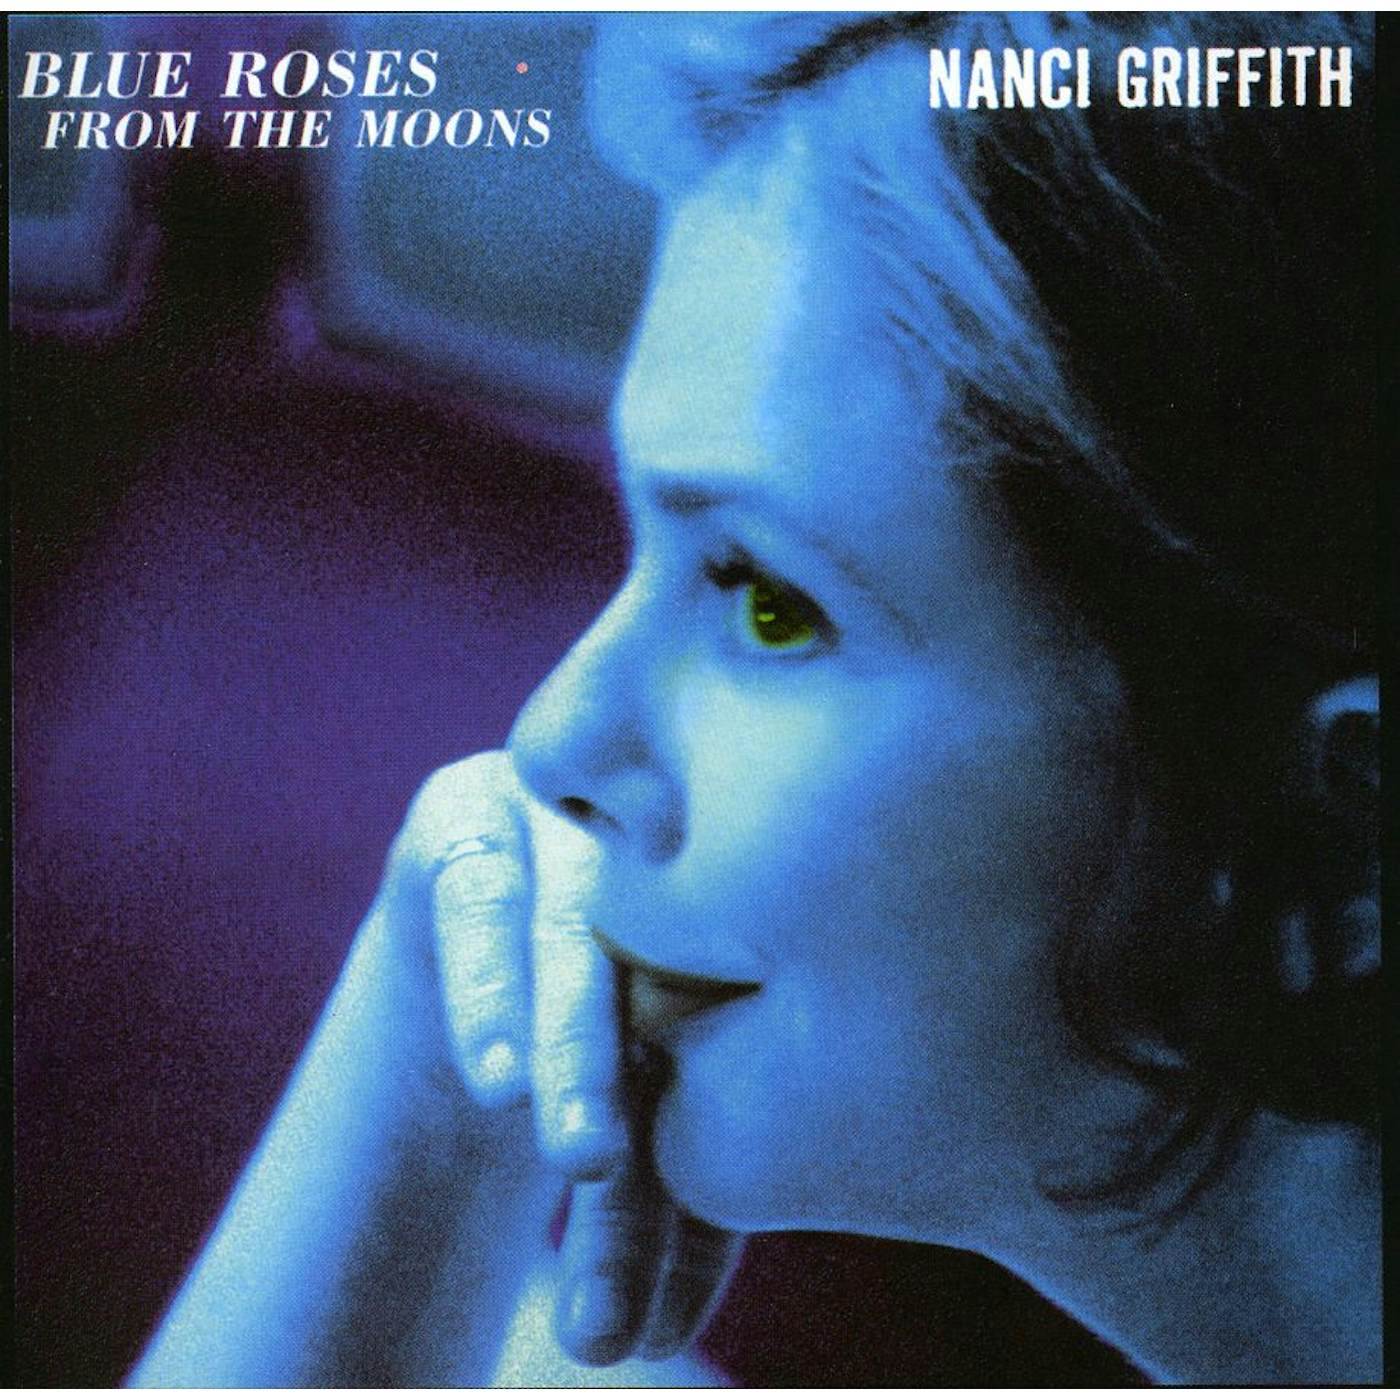 Nanci Griffith BLUE ROSES FROM THE MOONS CD